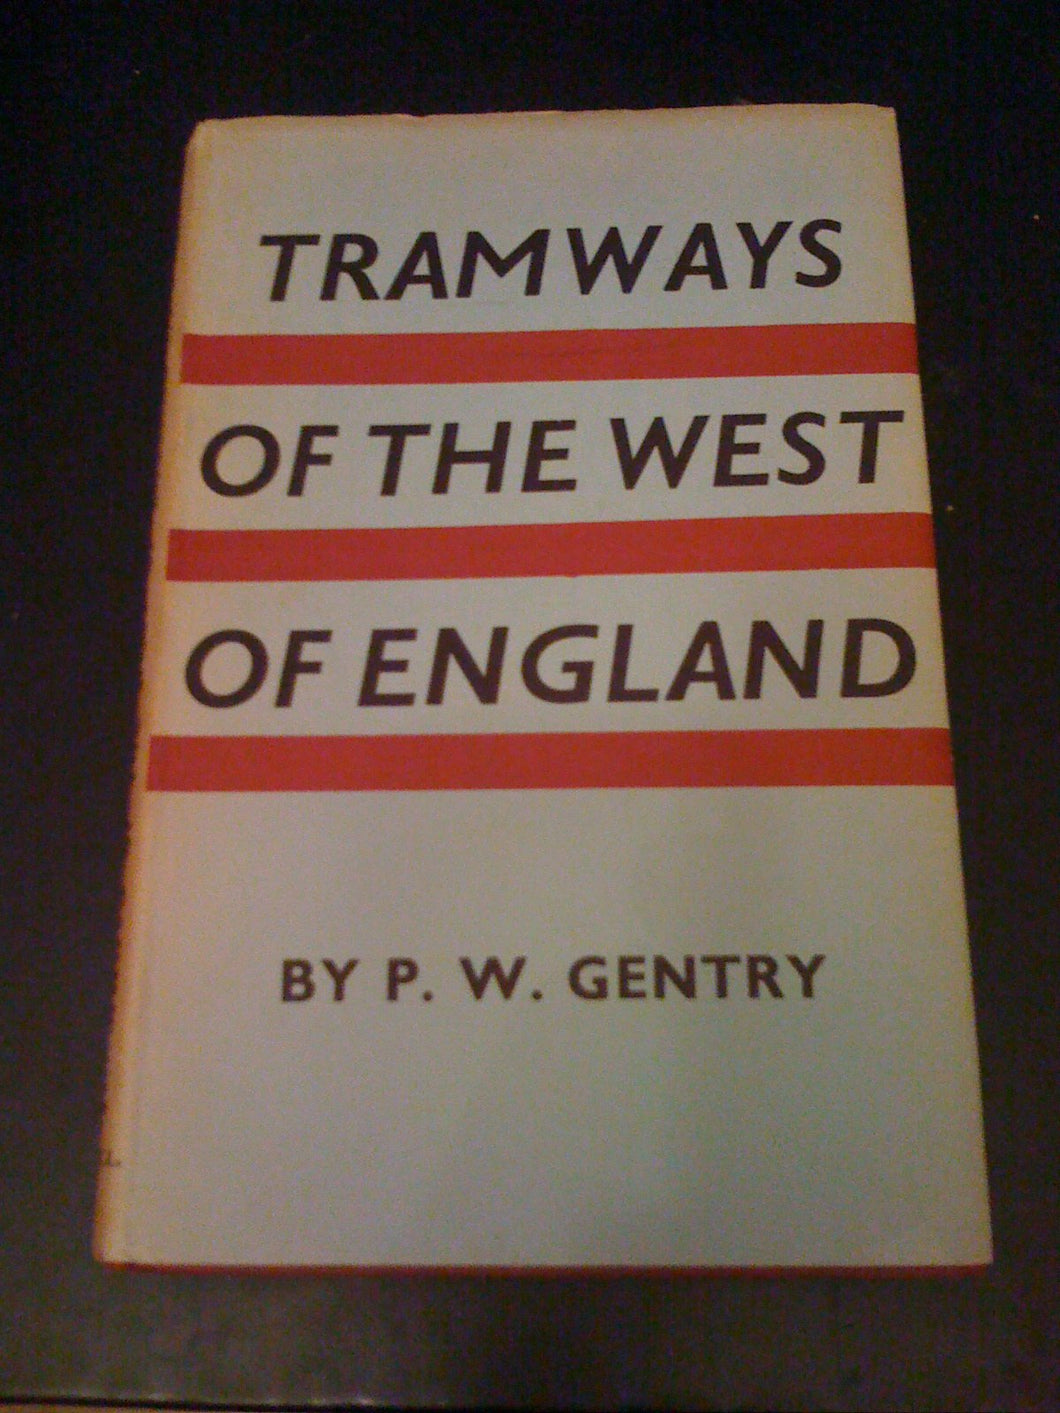 The tramways of the West of England (Light Railway Transport League. Publications) Gentry, P. W